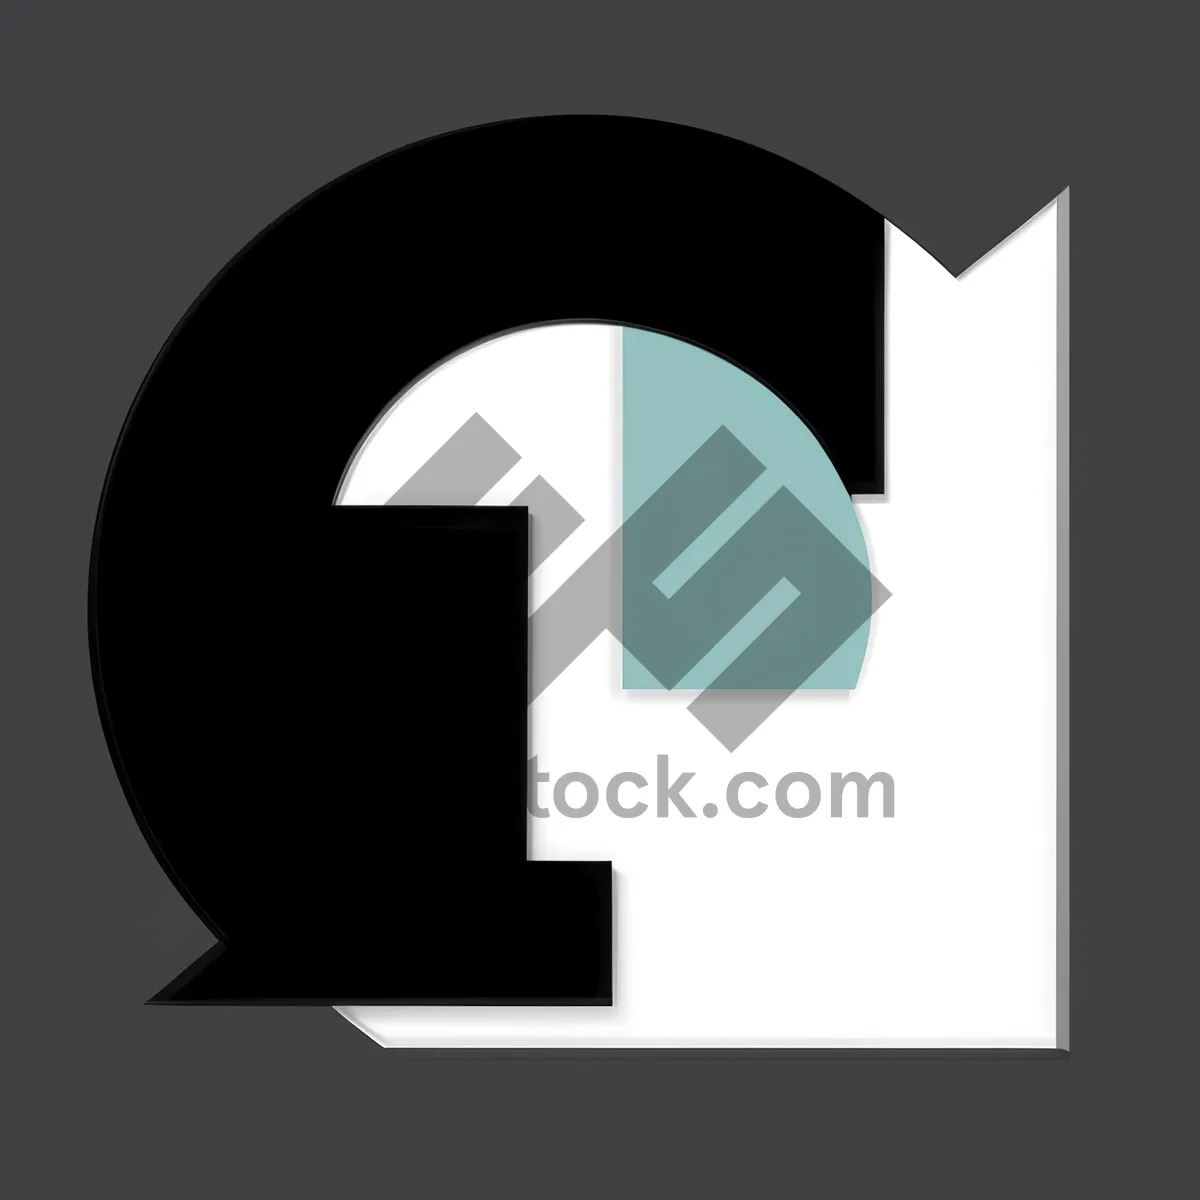 3D Money Icon for Business and Finance"
OR
"Bank Currency Symbol - 3D Money Icon